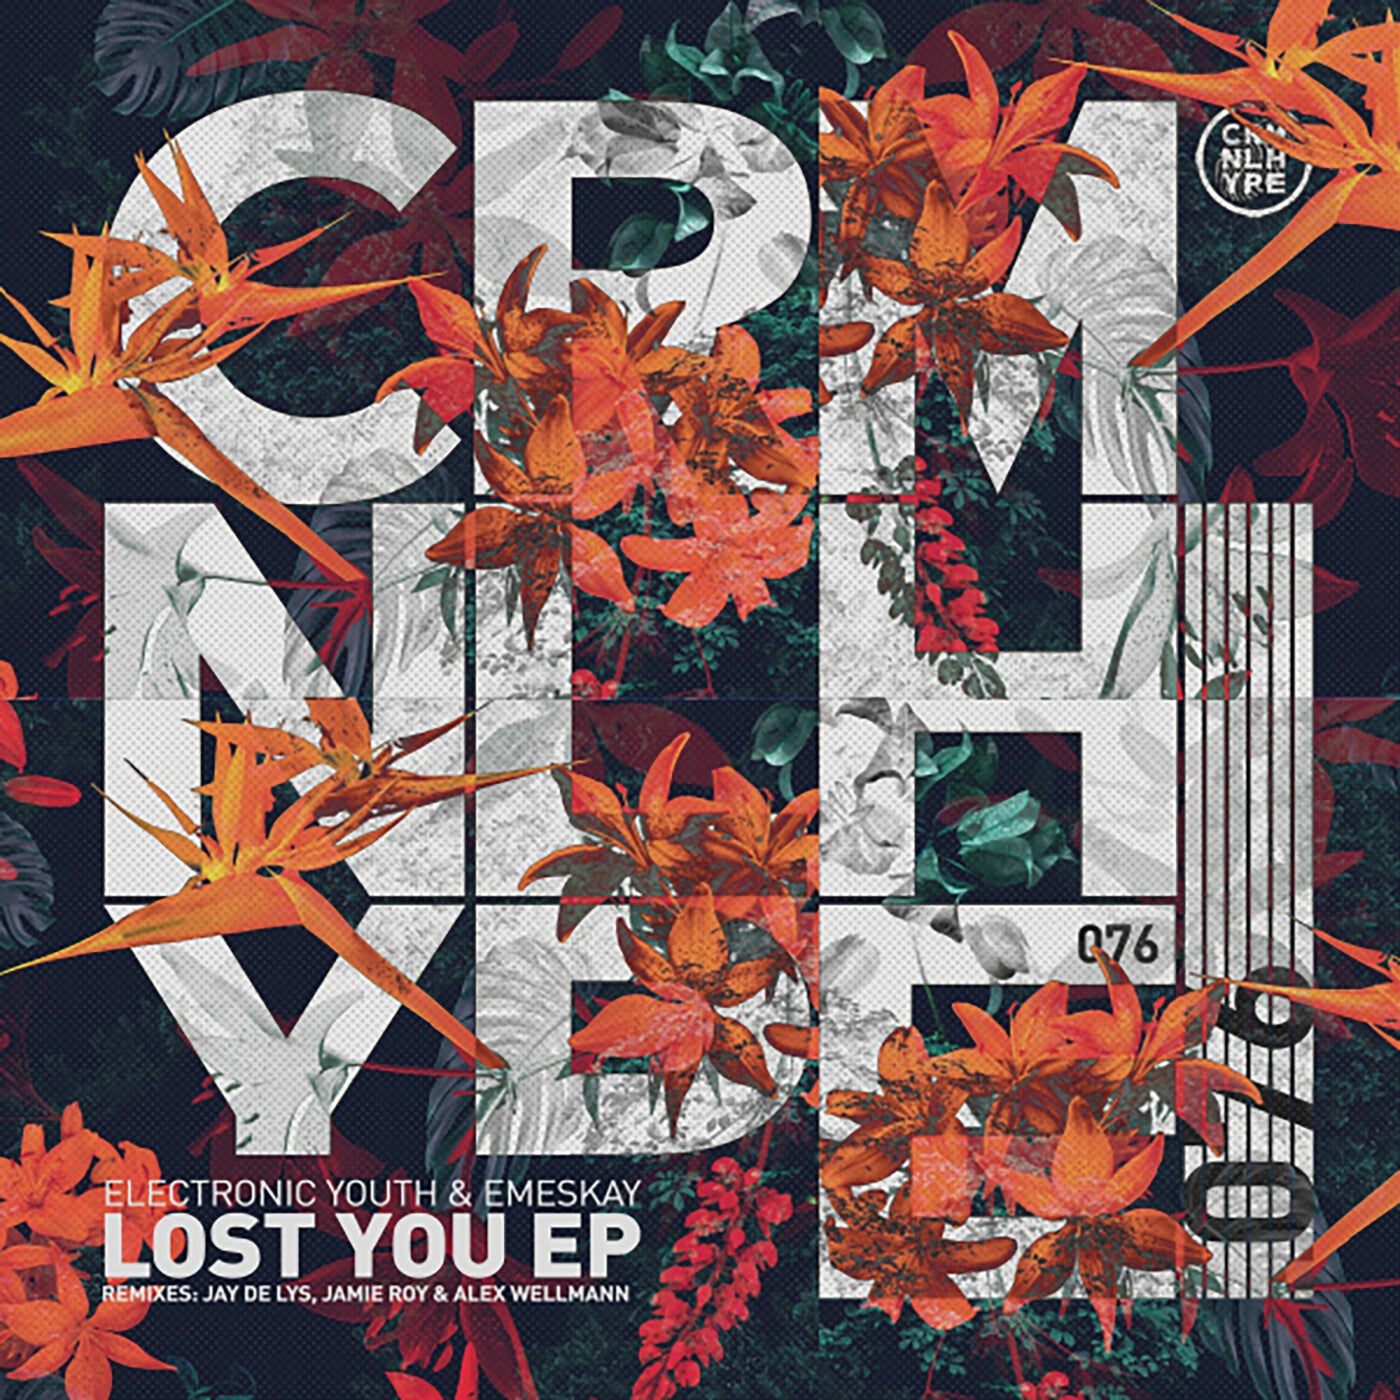 Lost You